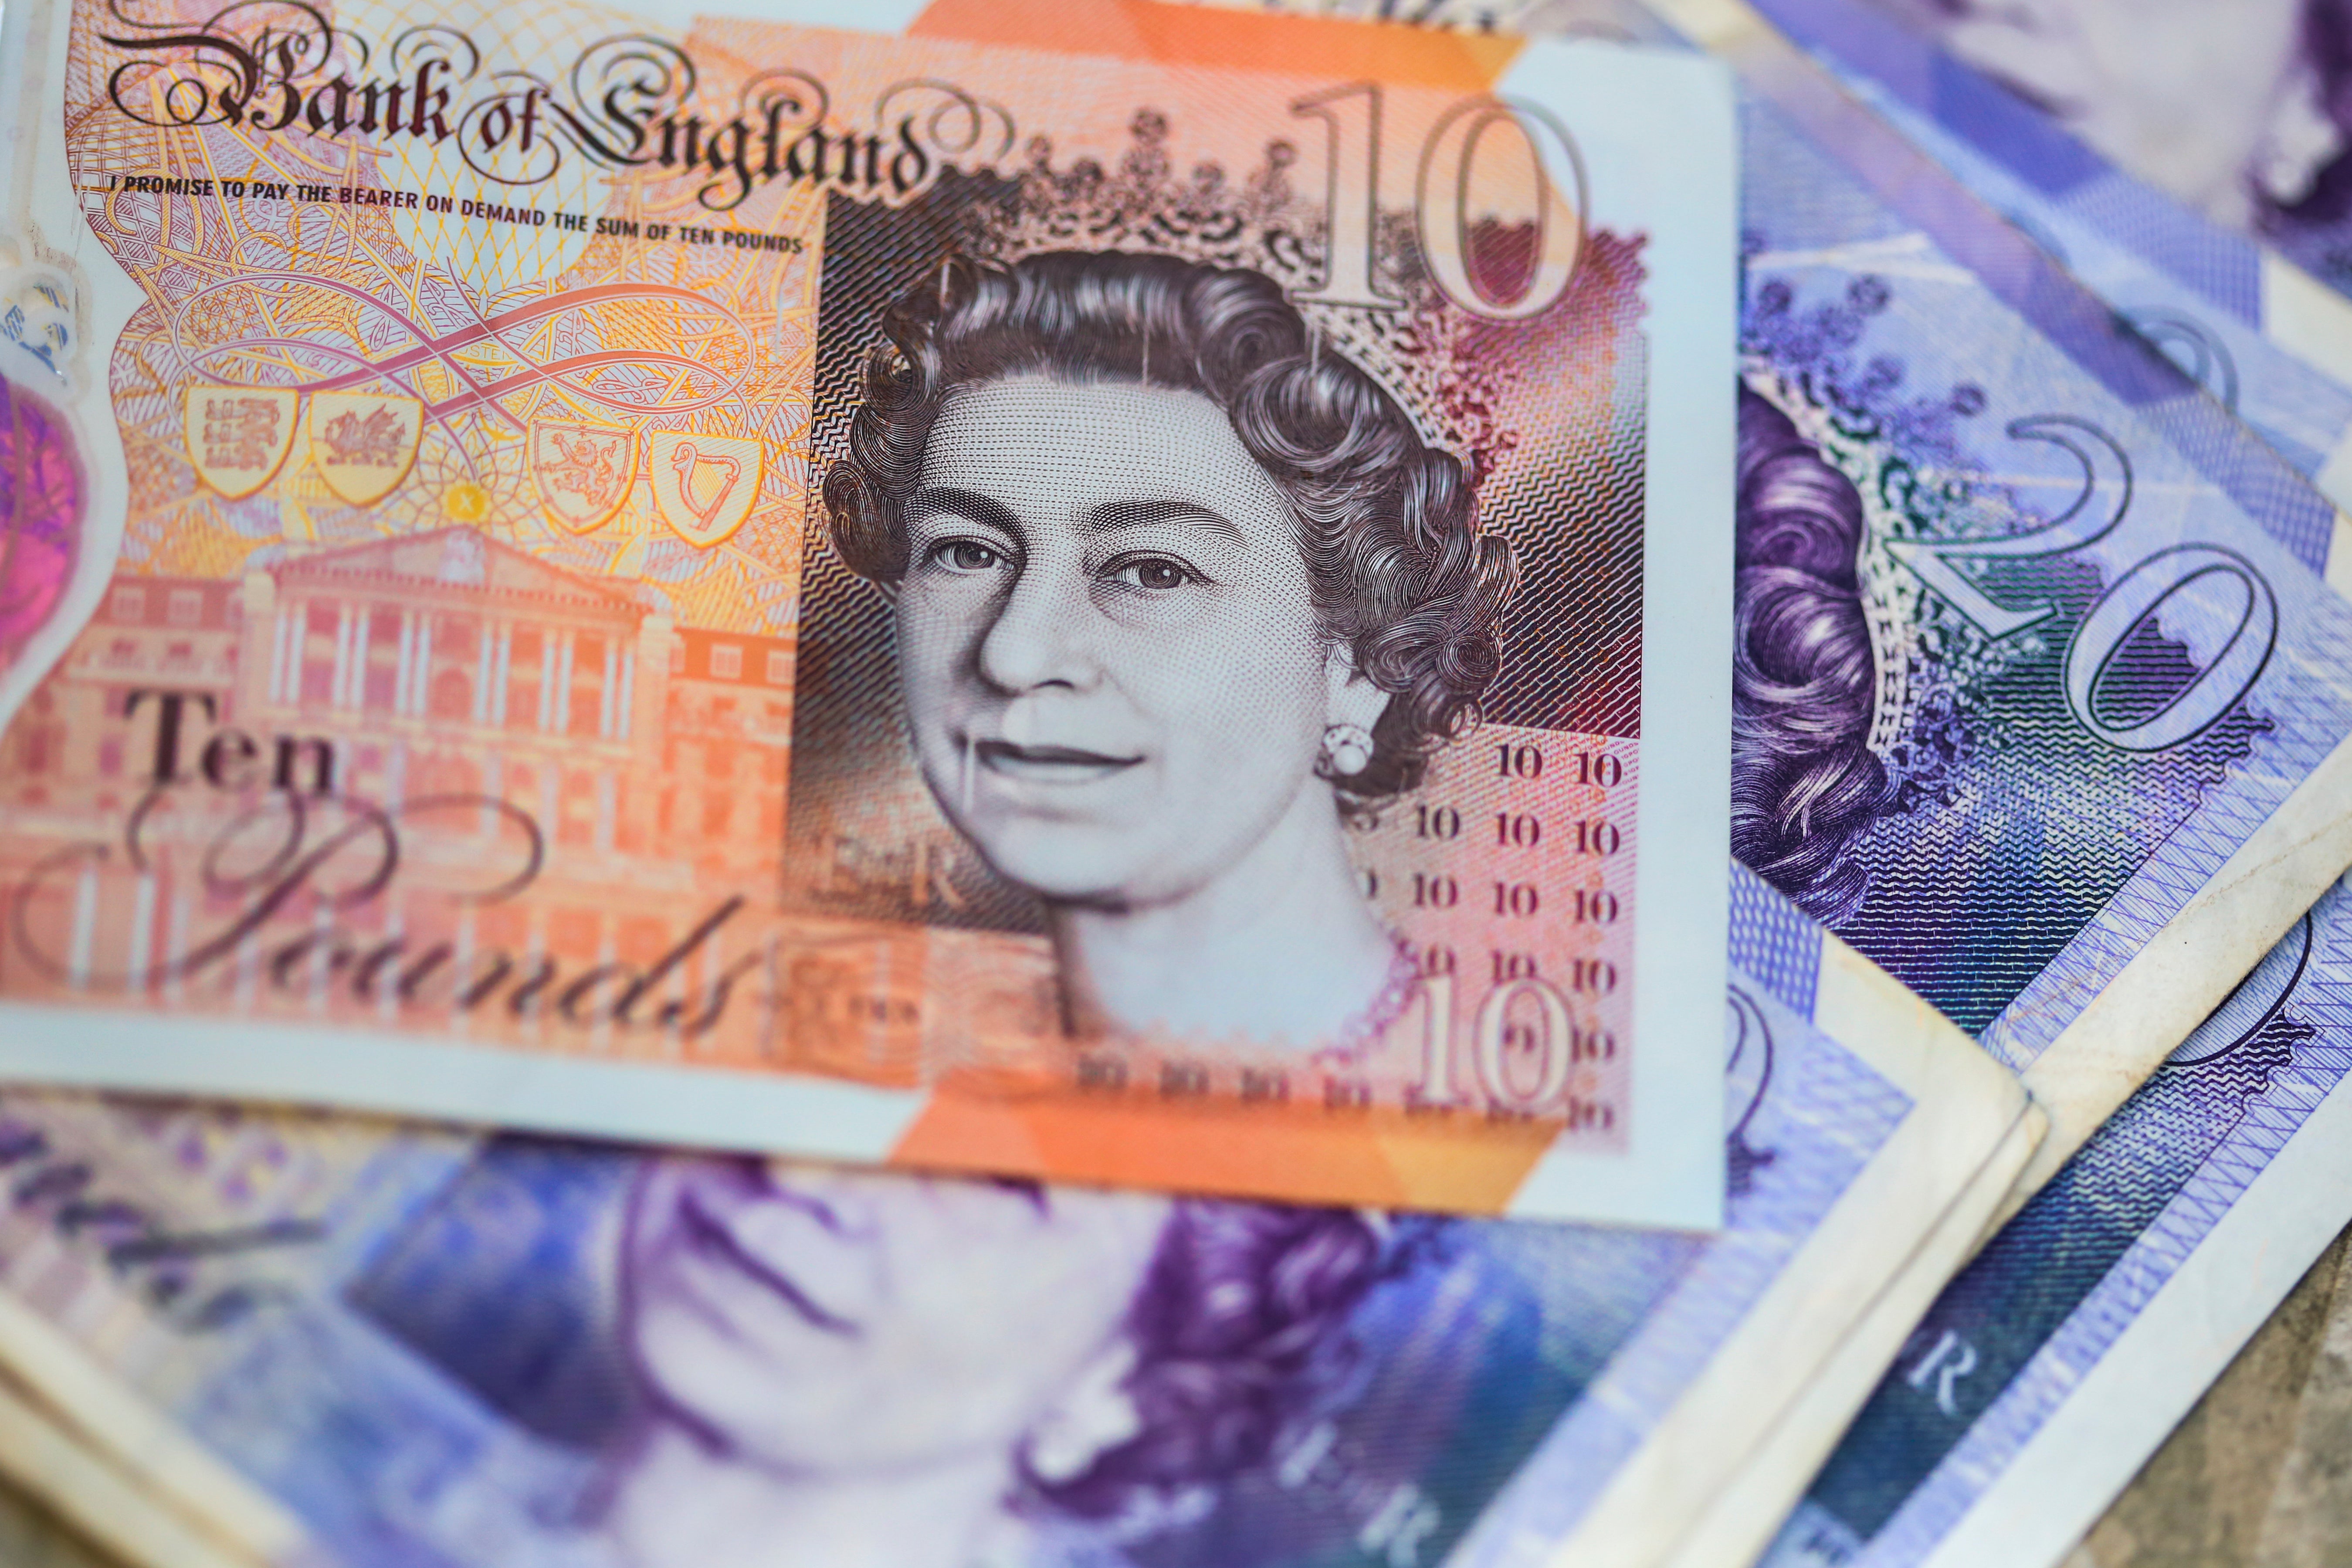 How will money change now that the Queen has died?